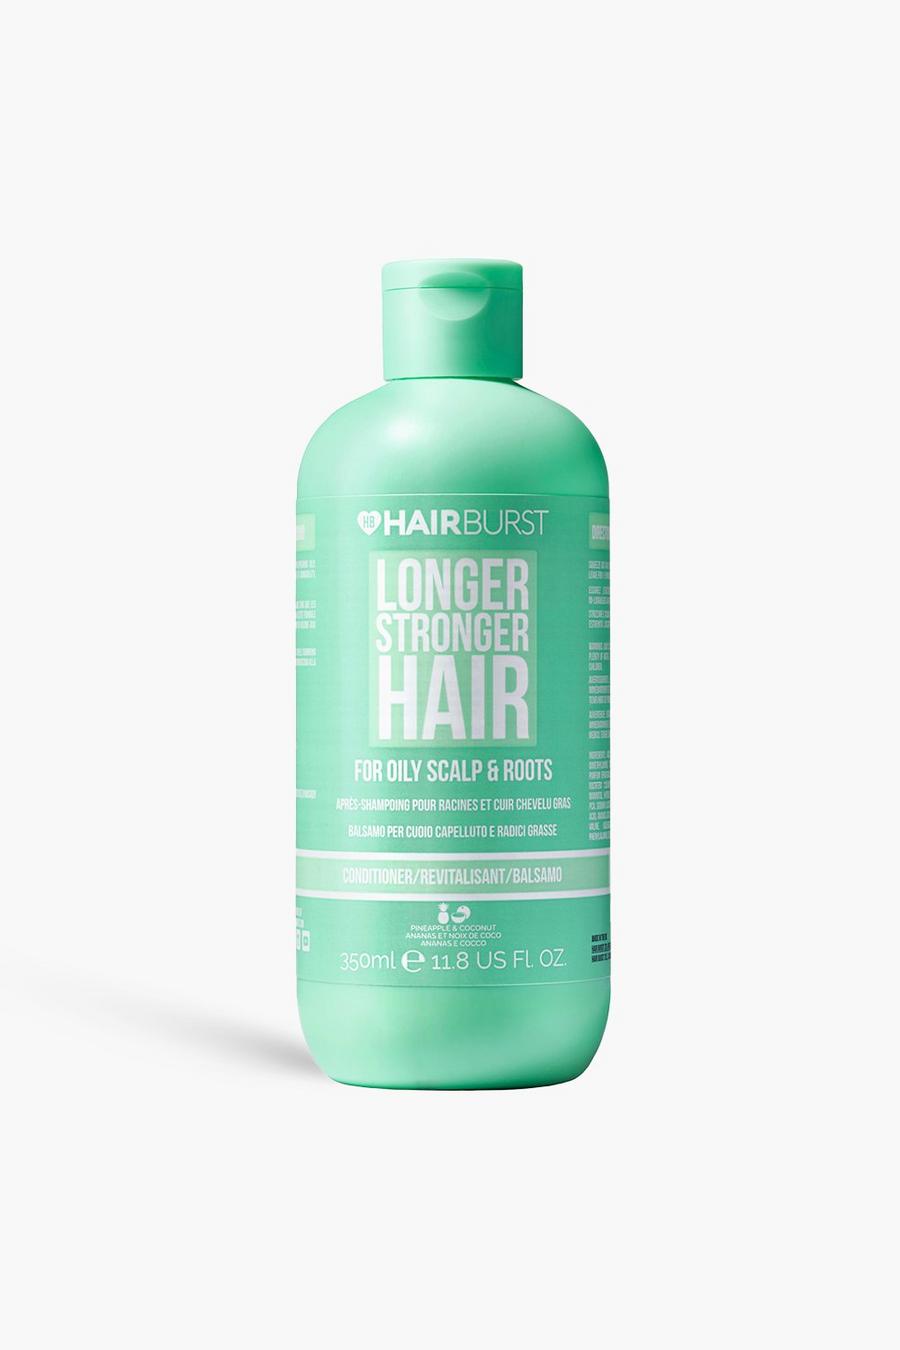 Green Hairburst Conditioner for Oily Scalp & Roots 